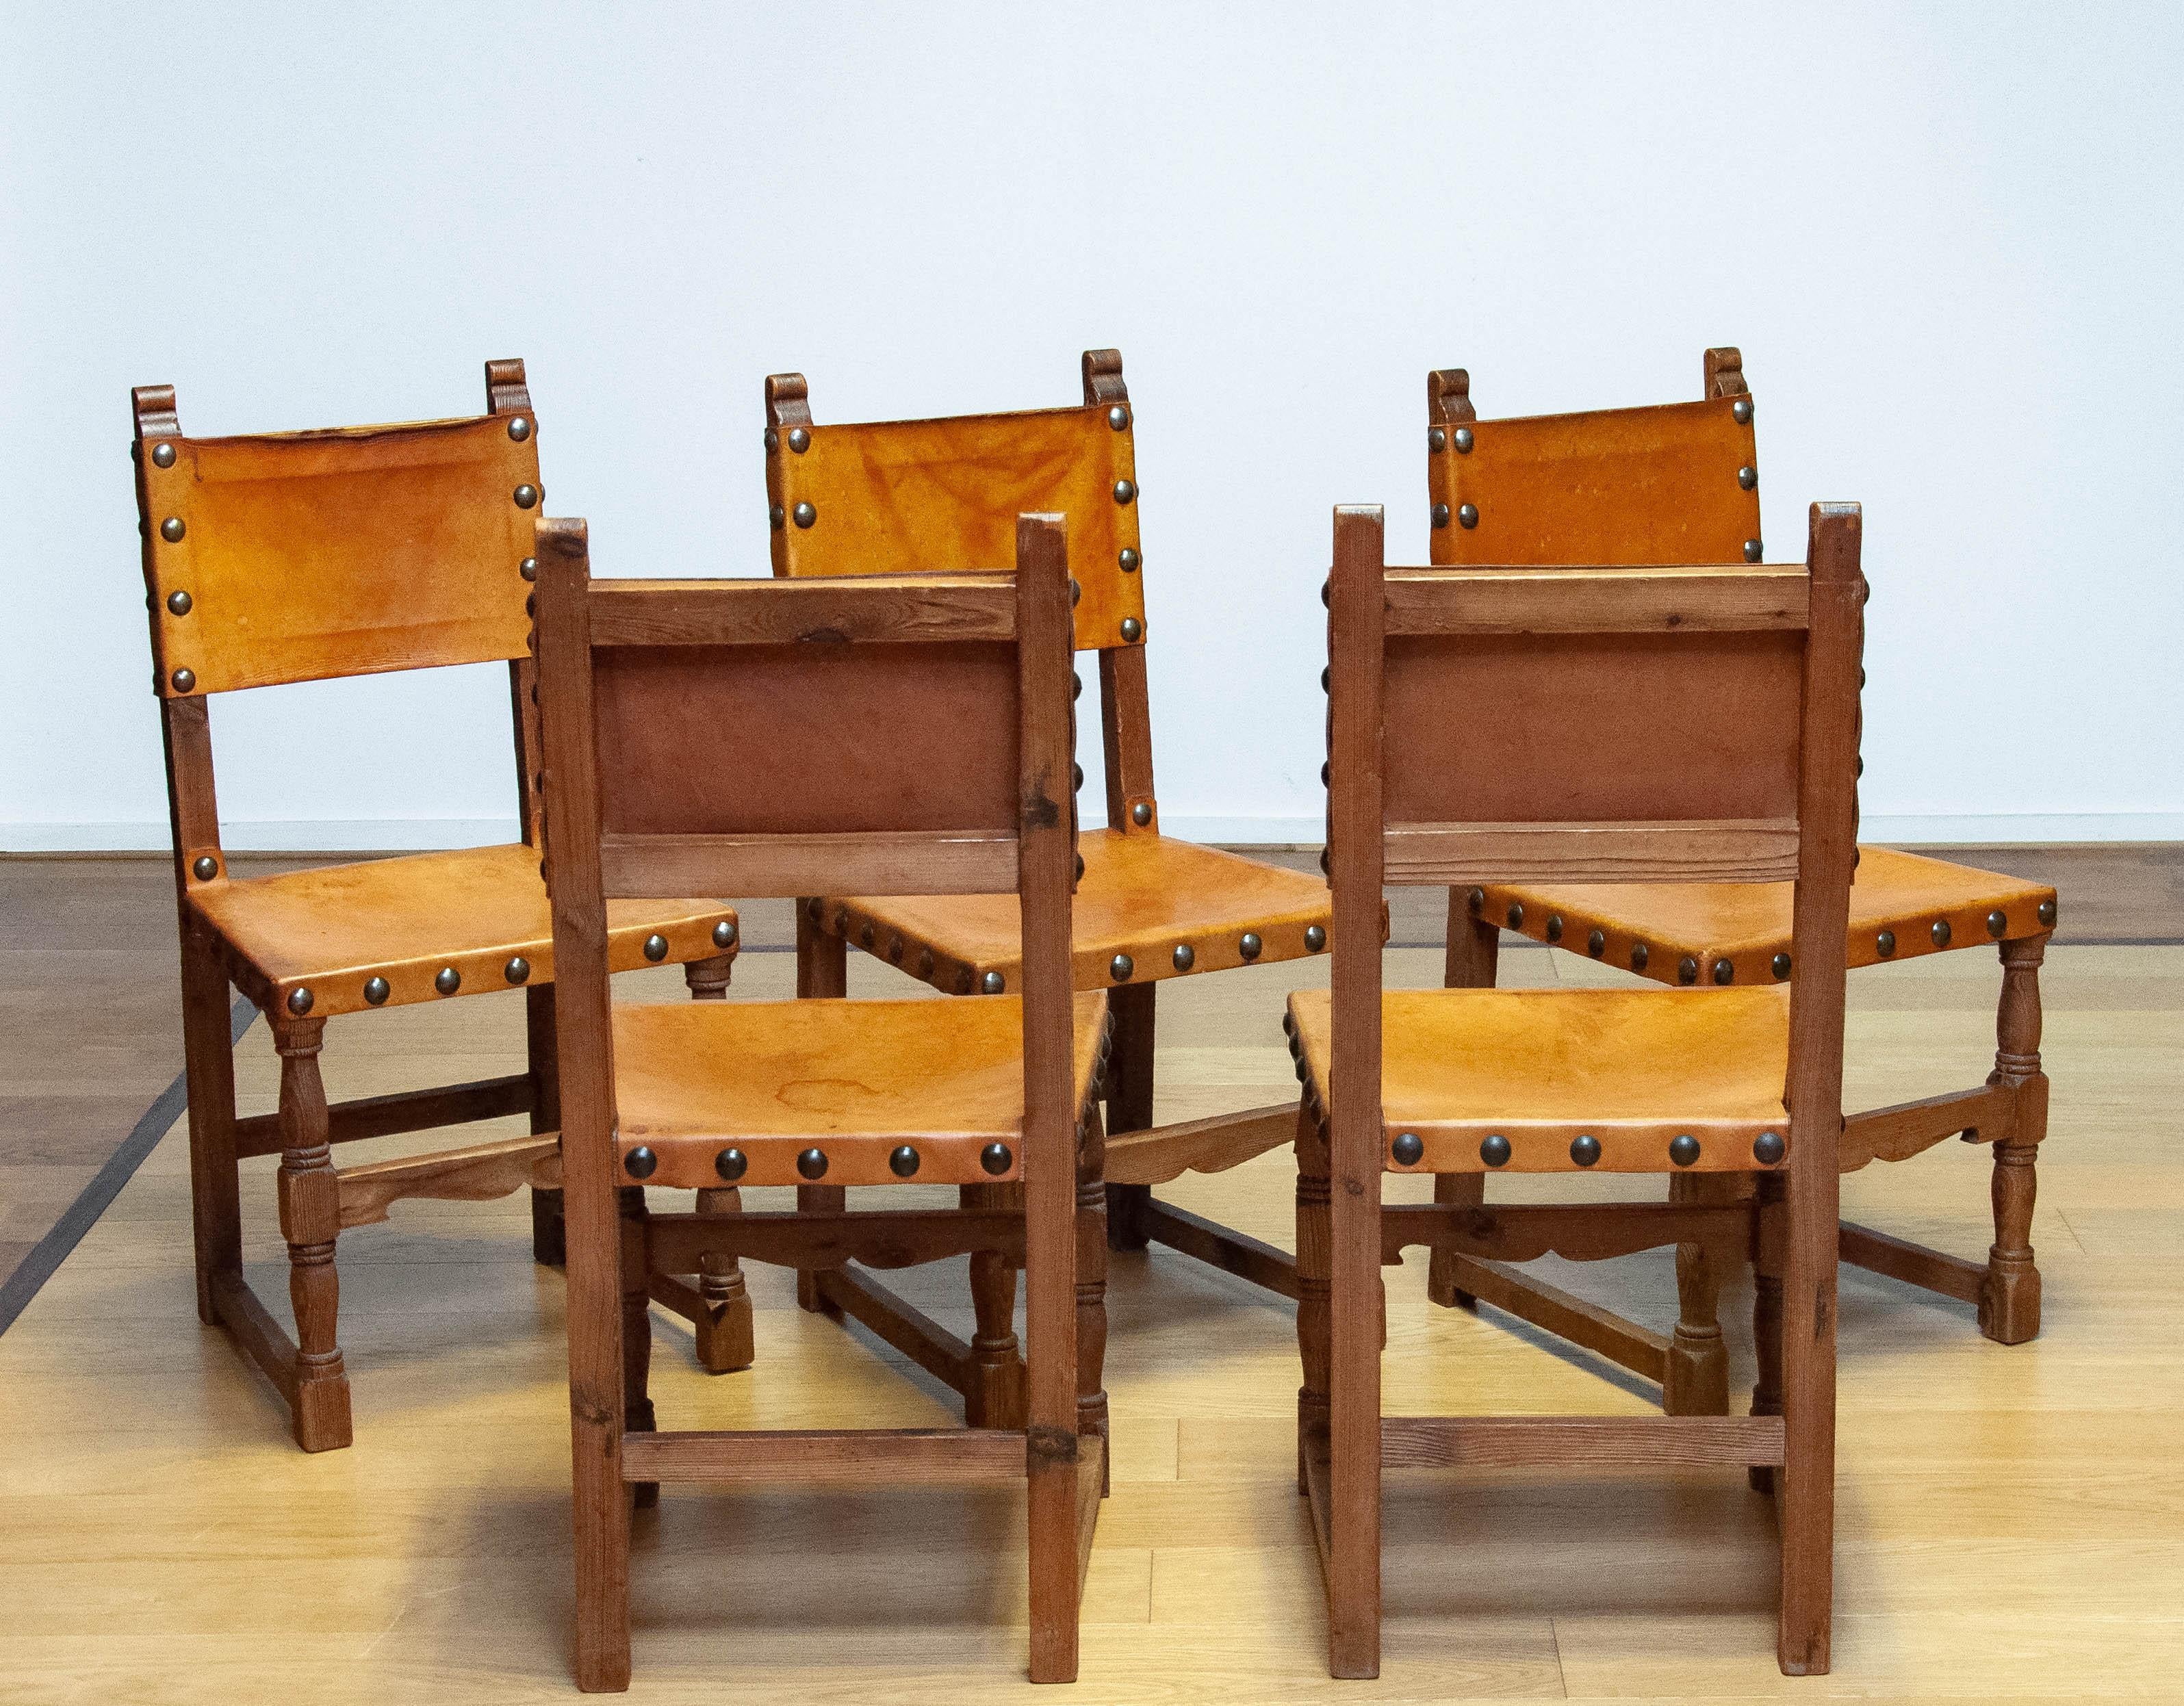 6 Antique Swedish Folk Art Farm County Dining Chairs In Pine And Tan Leather For Sale 8